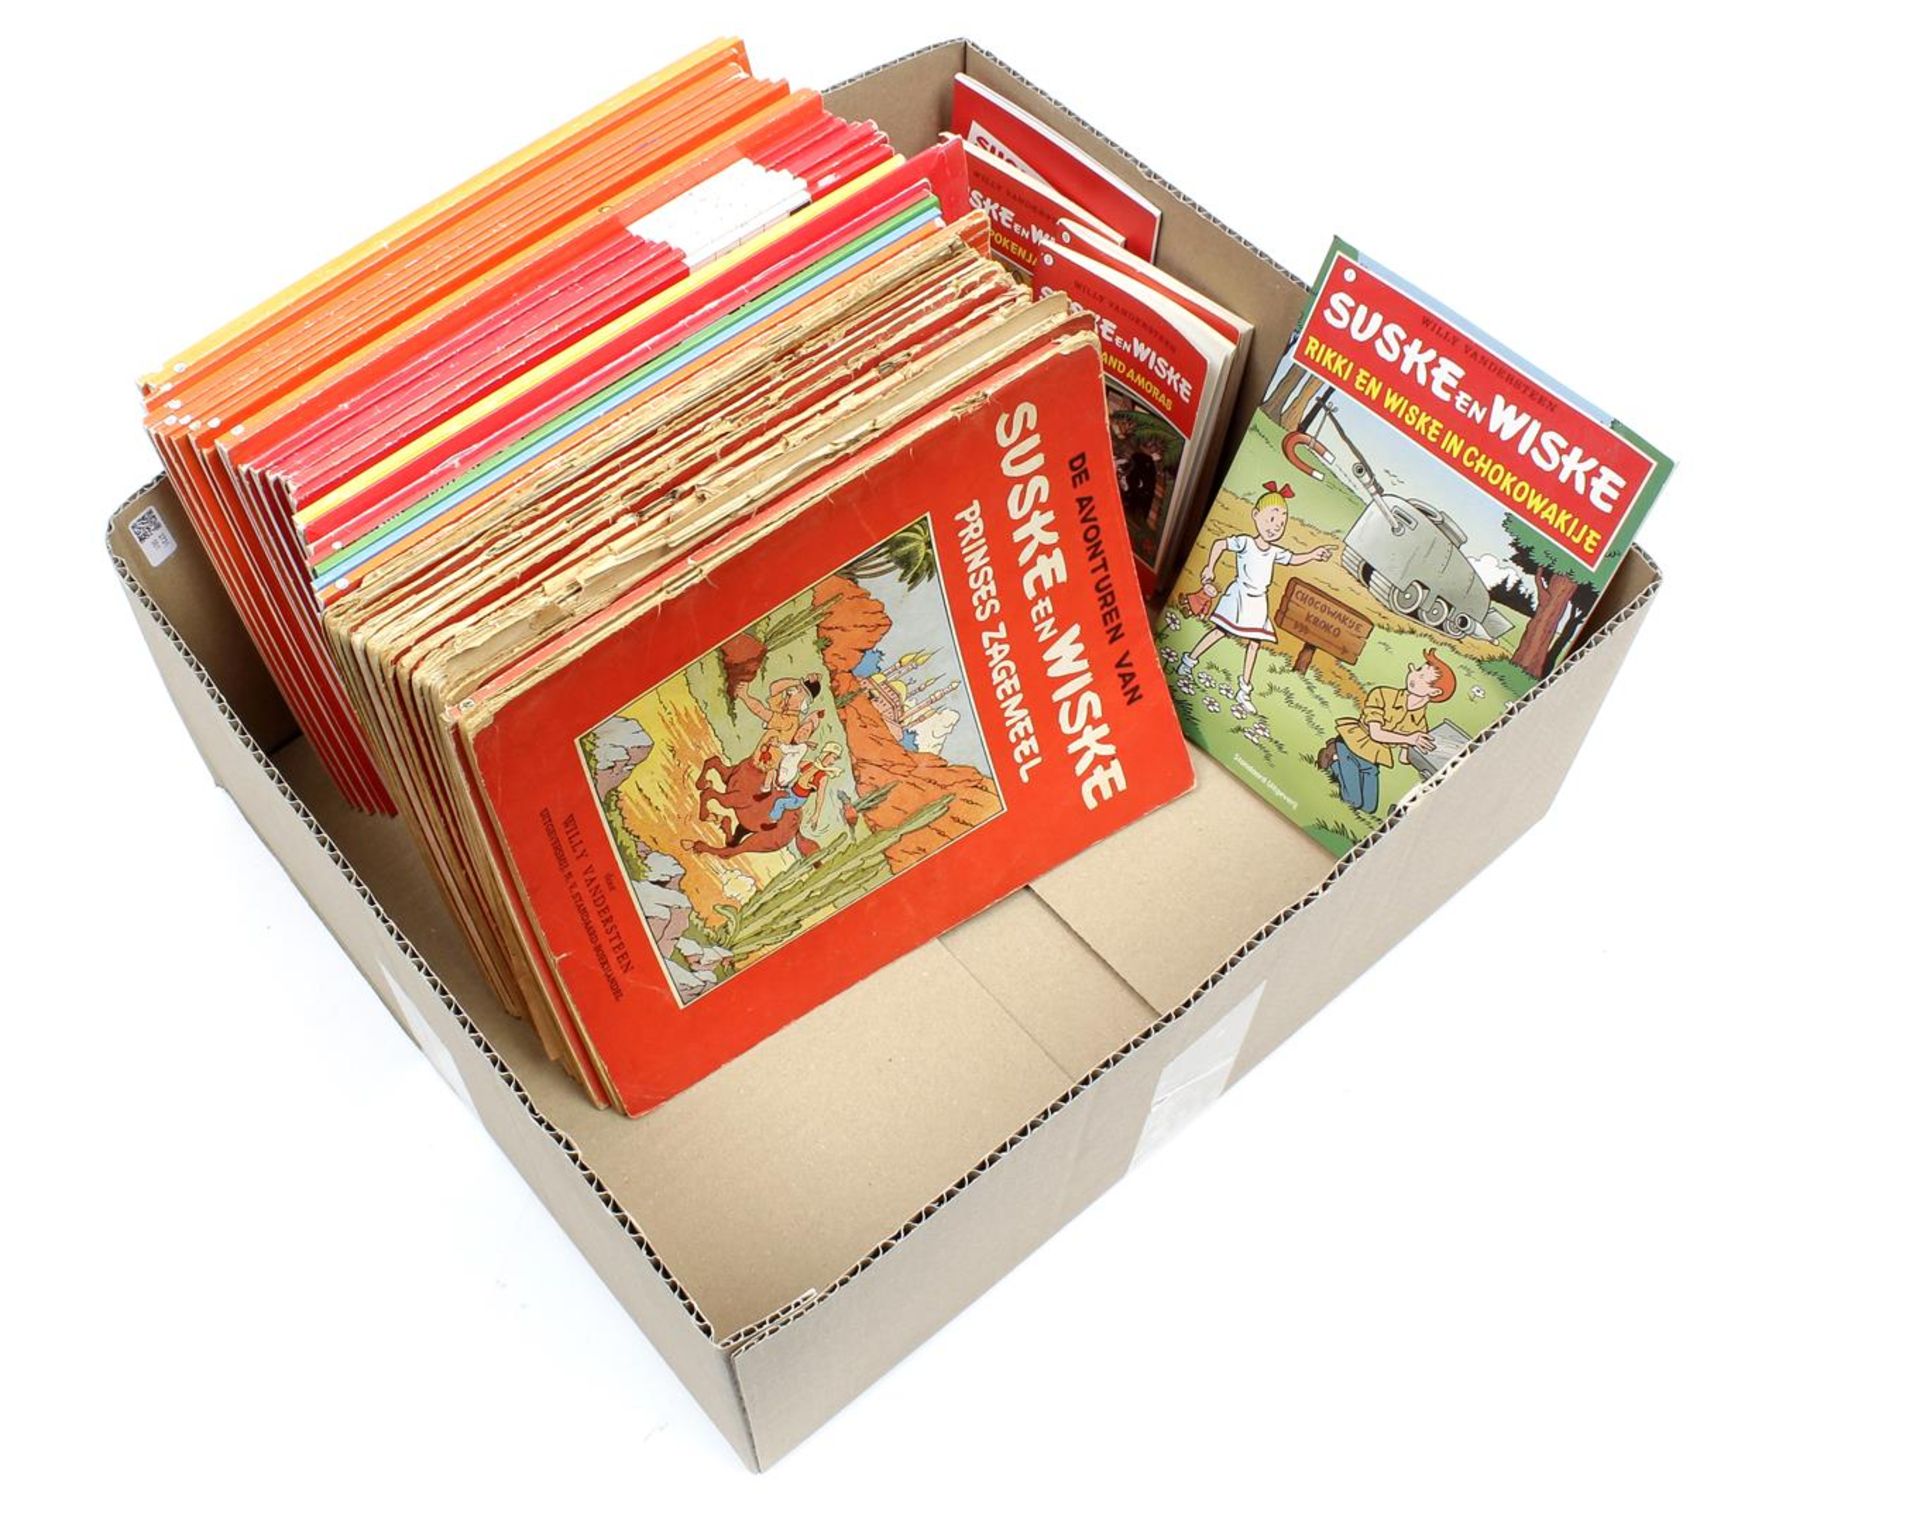 Box with Suske en Wiske comic books including 10 from the 50s-70s (various damage)